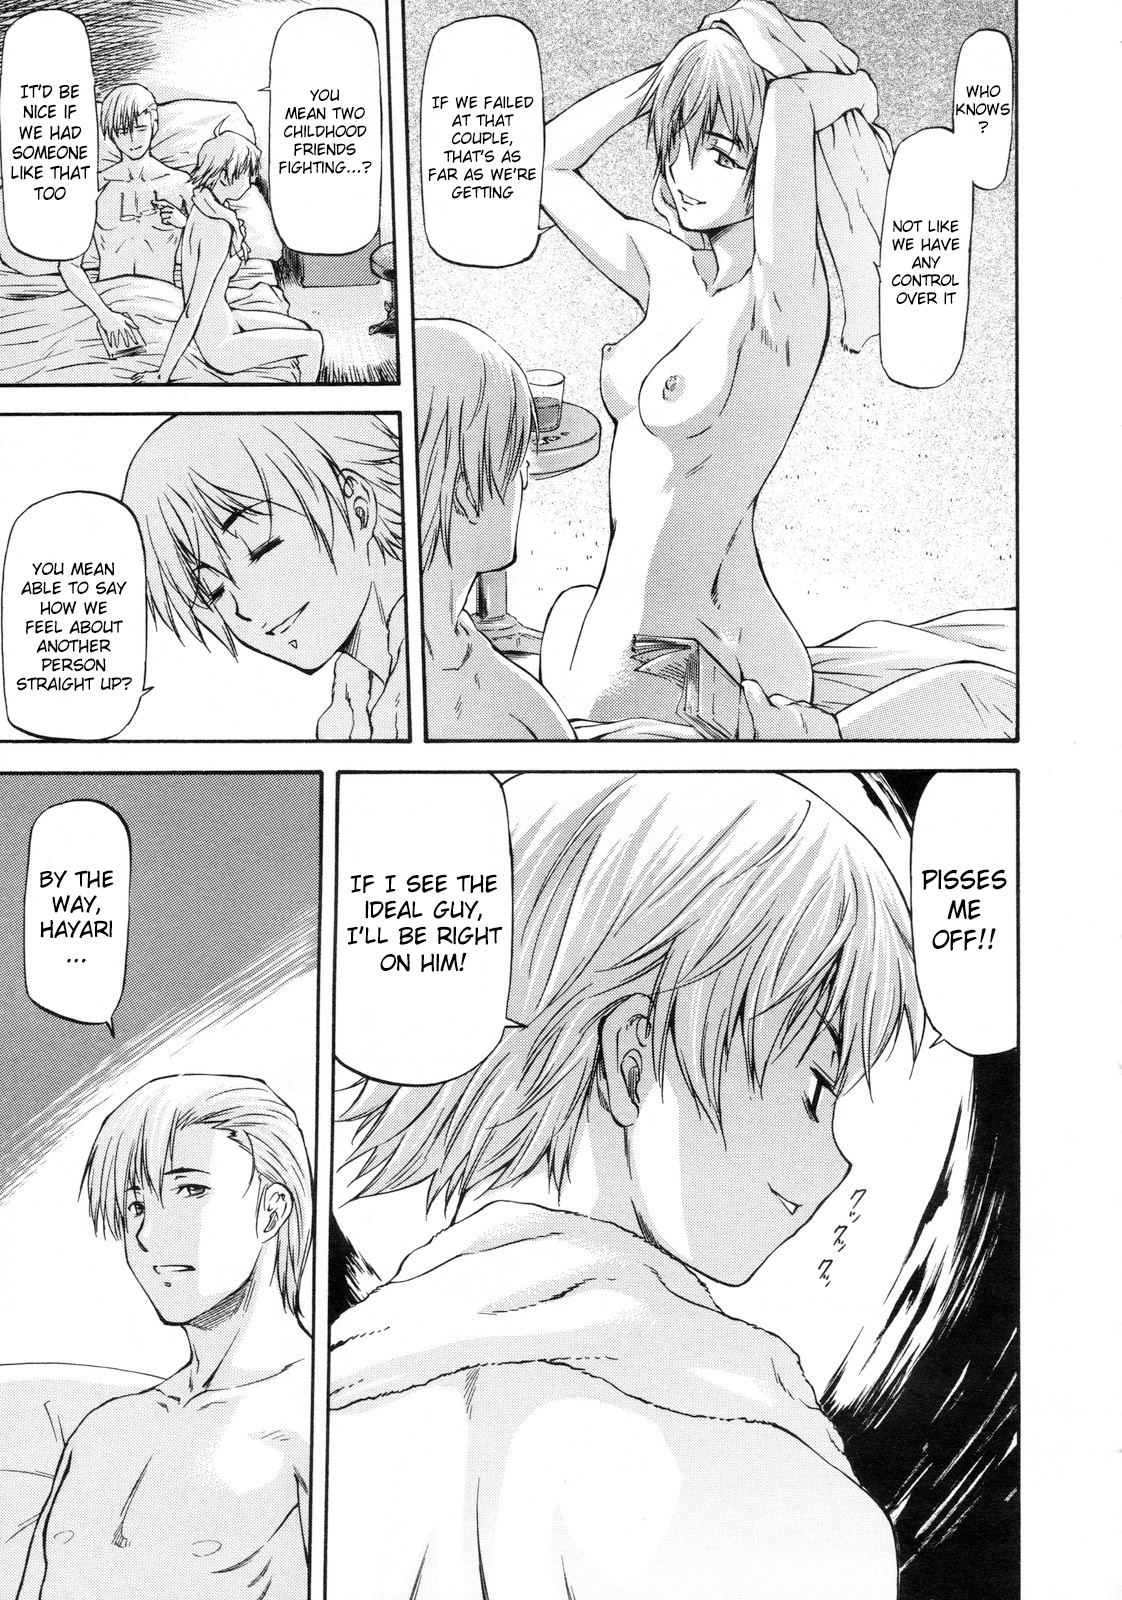 [Nagare Ippon] Confession From Beyond the Mirror [ENG][RyuuTama] 